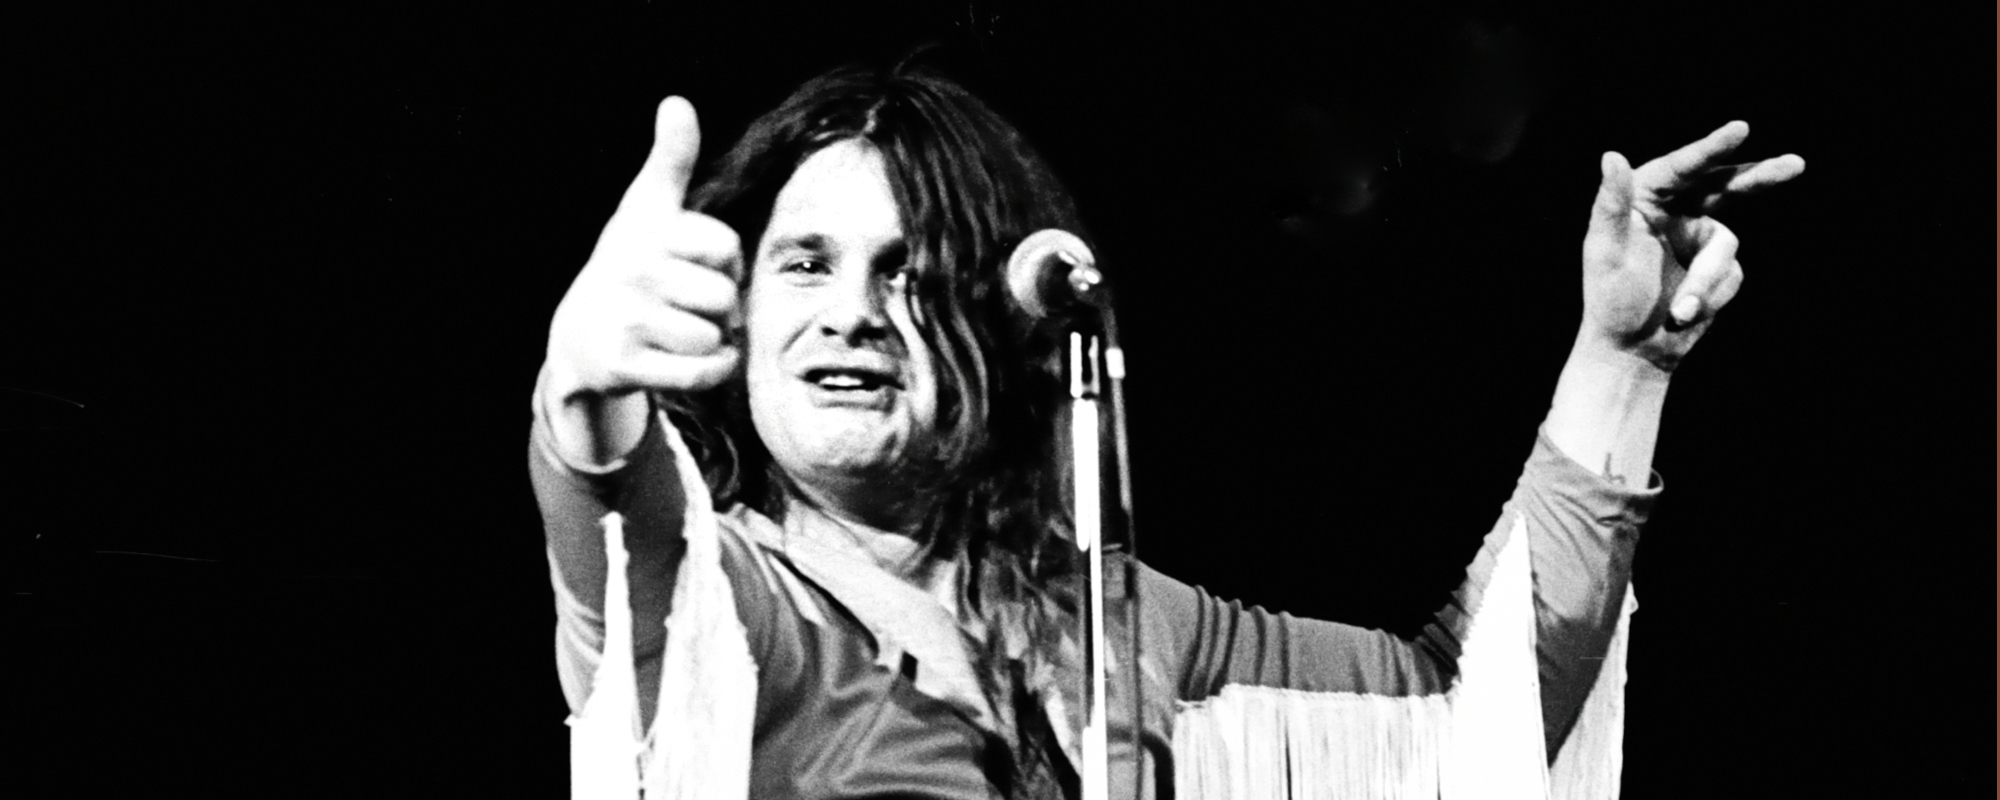 Behind the Meaning of Ozzy Osbourne’s Power Ballad “Mama, I’m Coming Home”